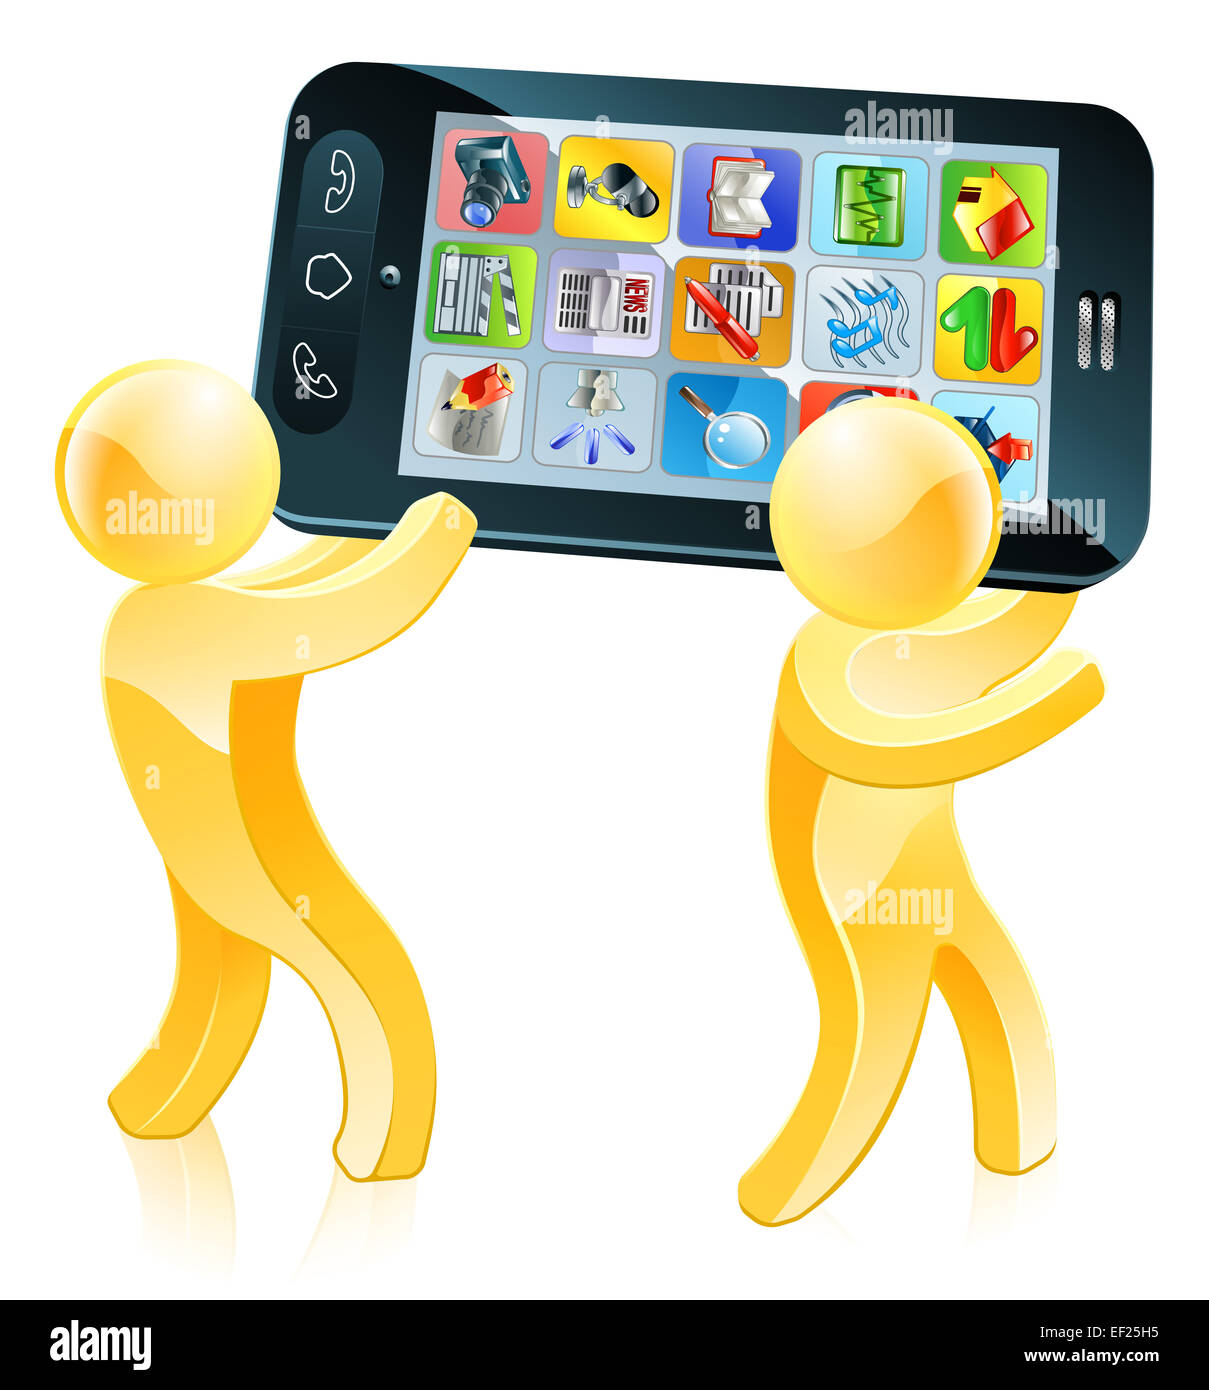 Mobile phone people illustration of two people carrying a giant mobile cell phone on their shoulders Stock Photo